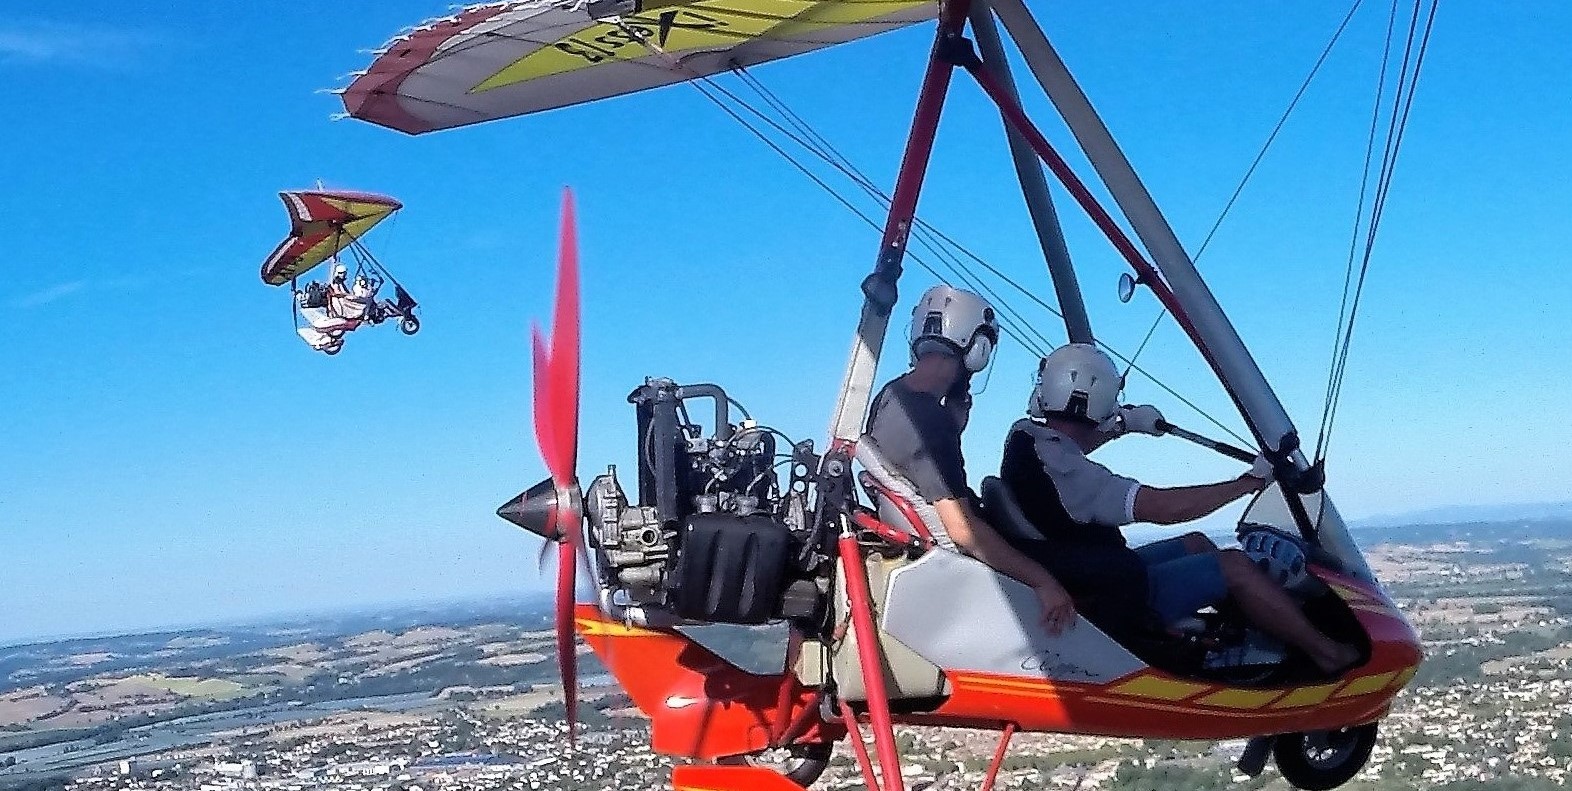 Ultralight Aircraft Base Toulouse and Tarn in France